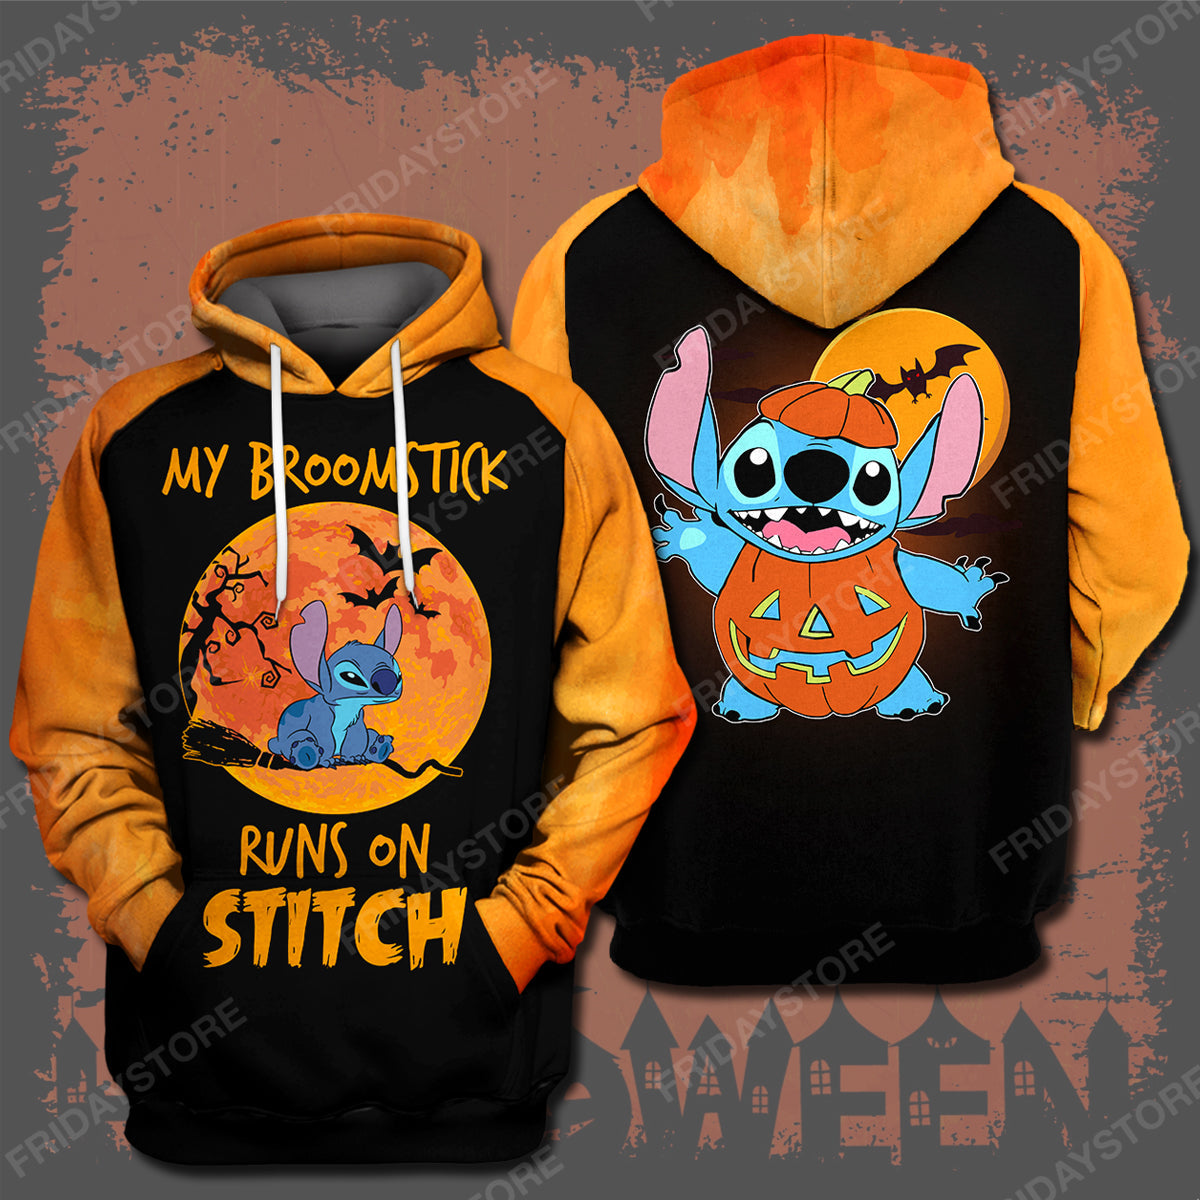 Unifinz LAS T-shirt My Broomstick Runs On Stitch T-shirt Awesome High Quality DN Stitch Hoodie Sweater Tank 2022